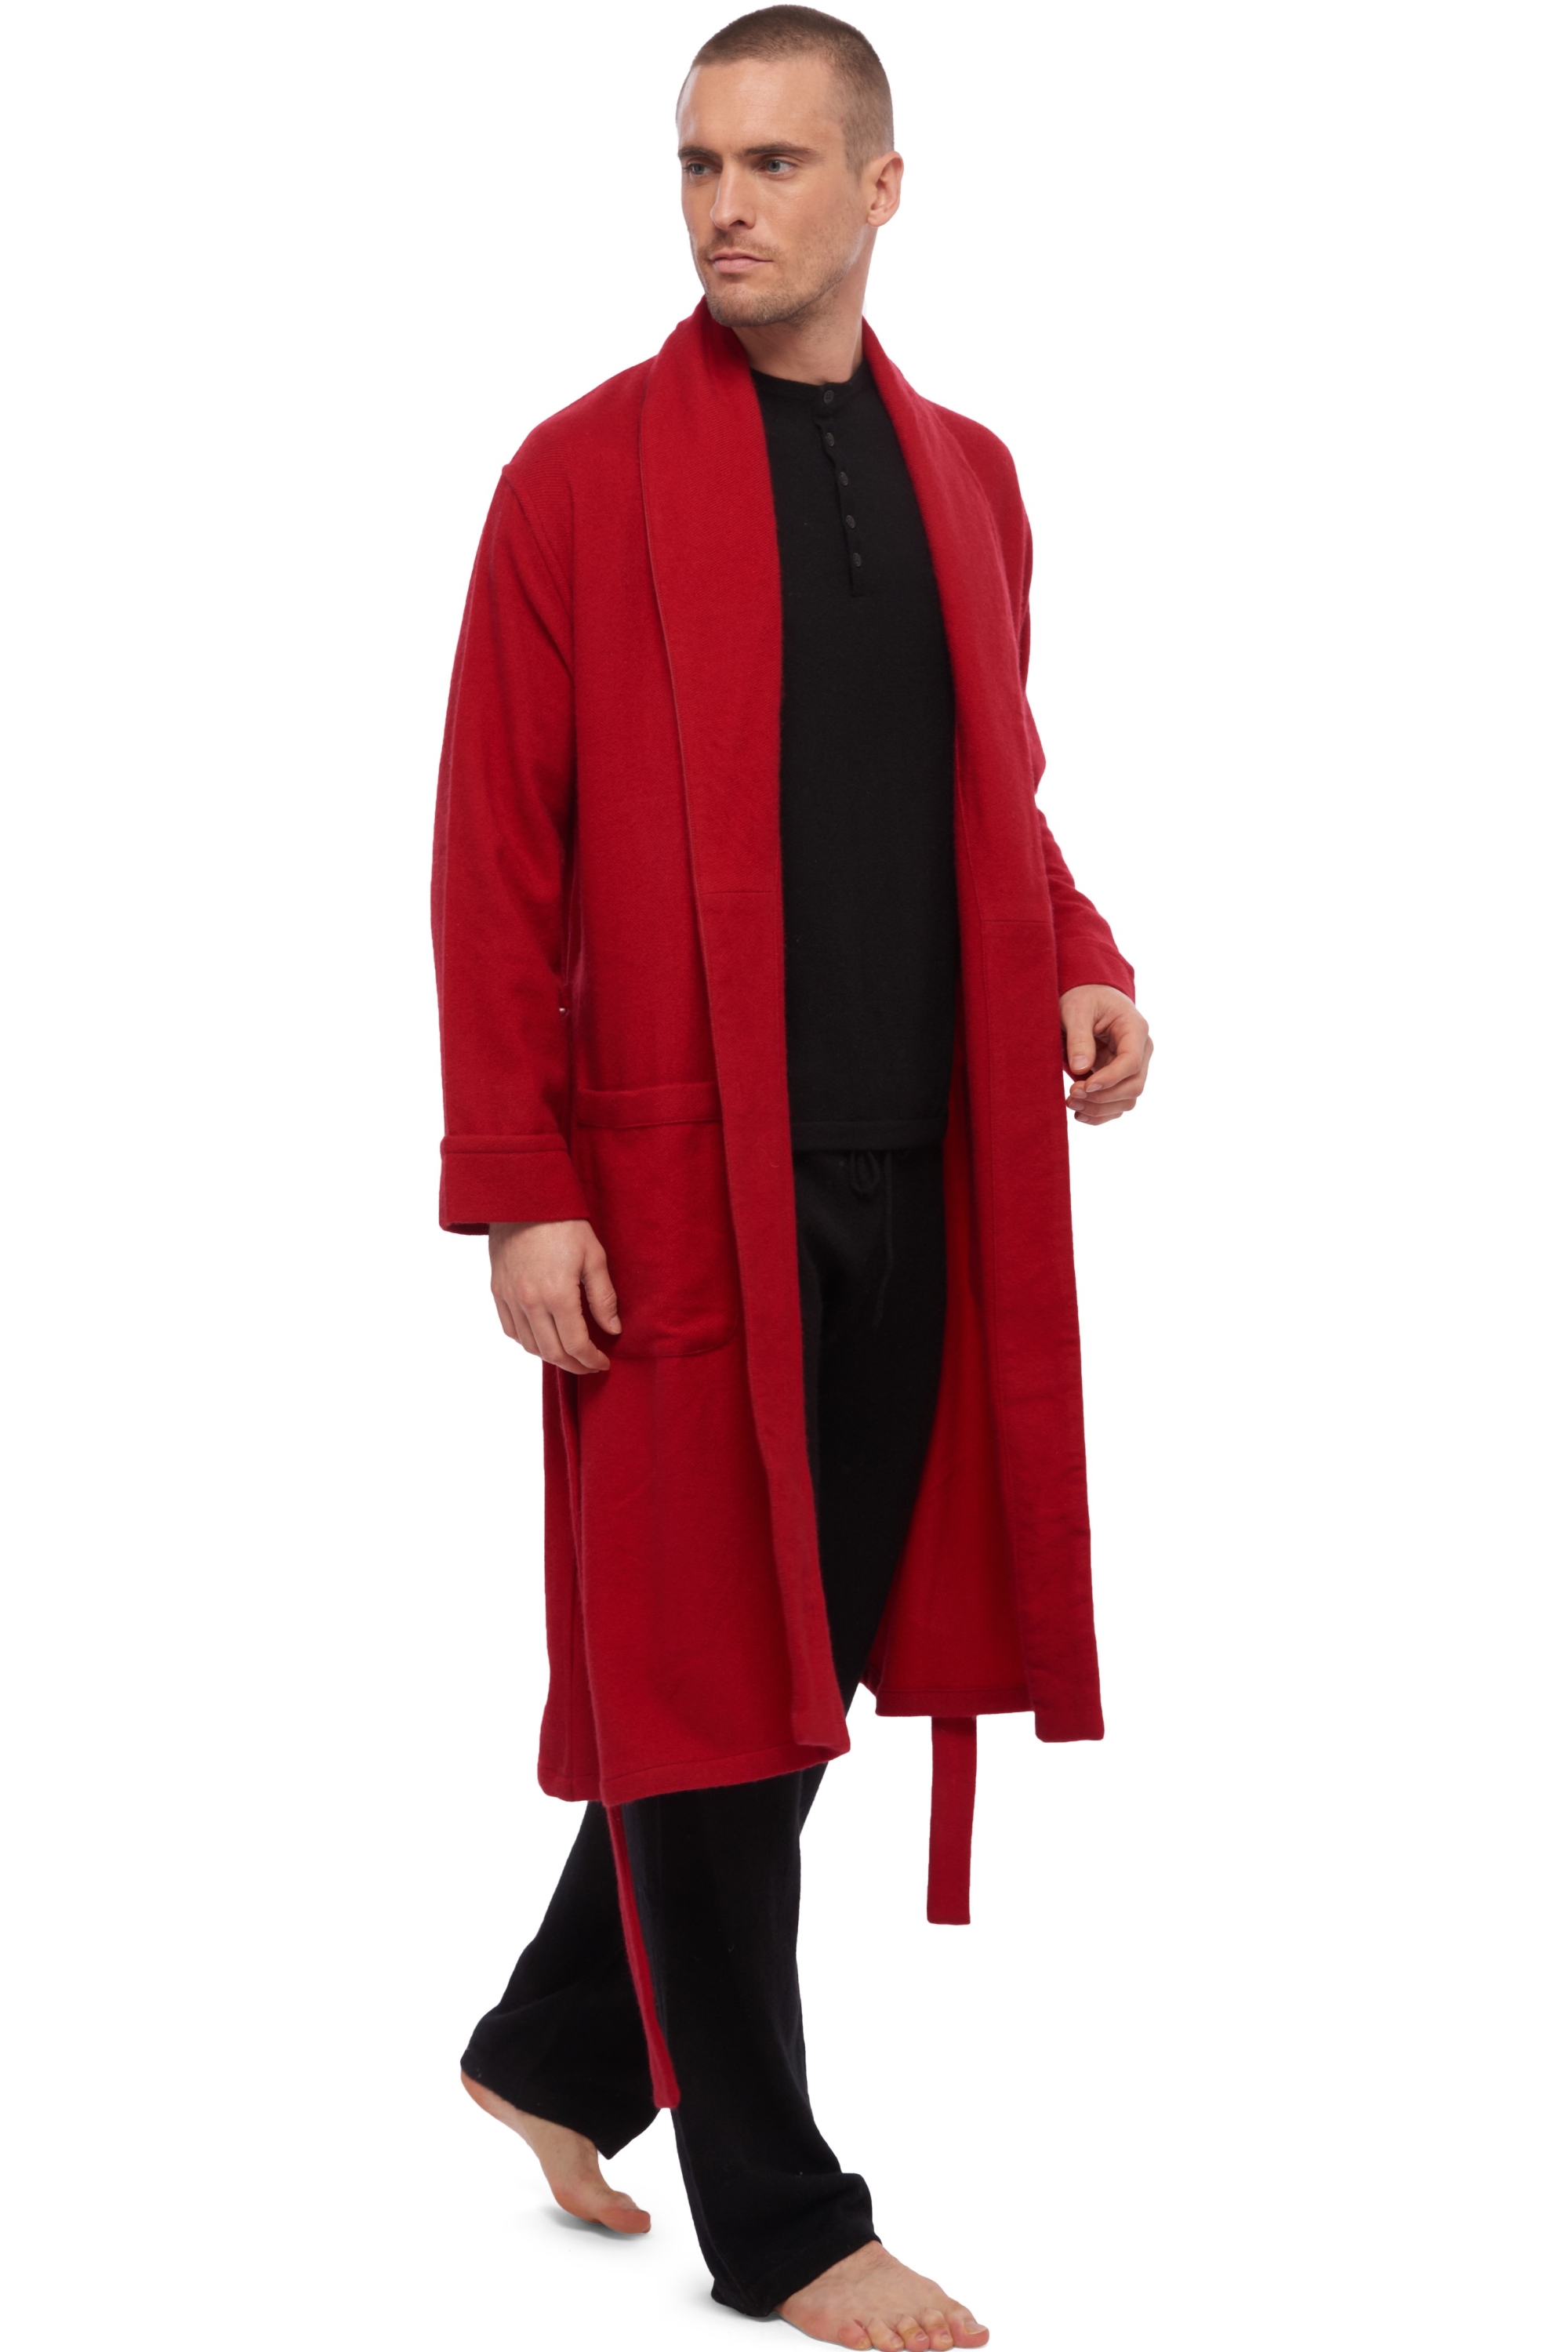 Cachemire interieur homme working rouge profond t4